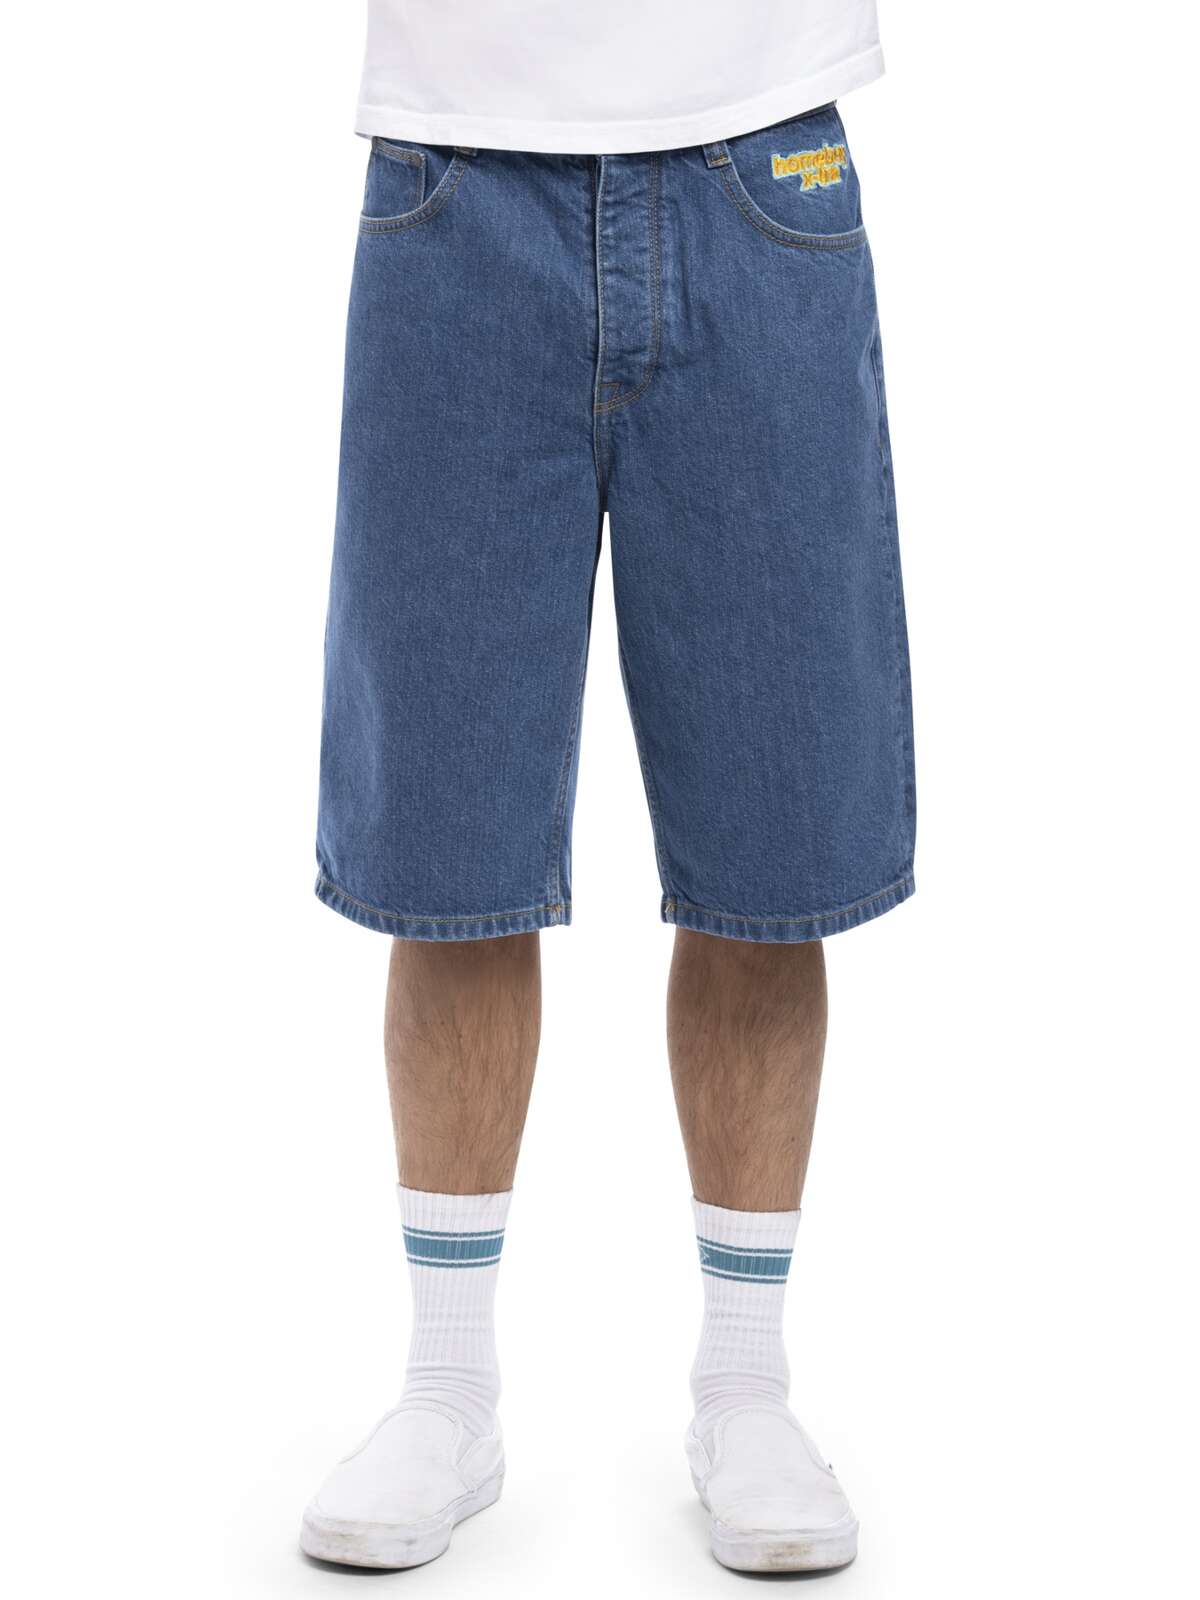 HOMEBOY - X-TRA BAGGY SHORTS - WASHED BLUE